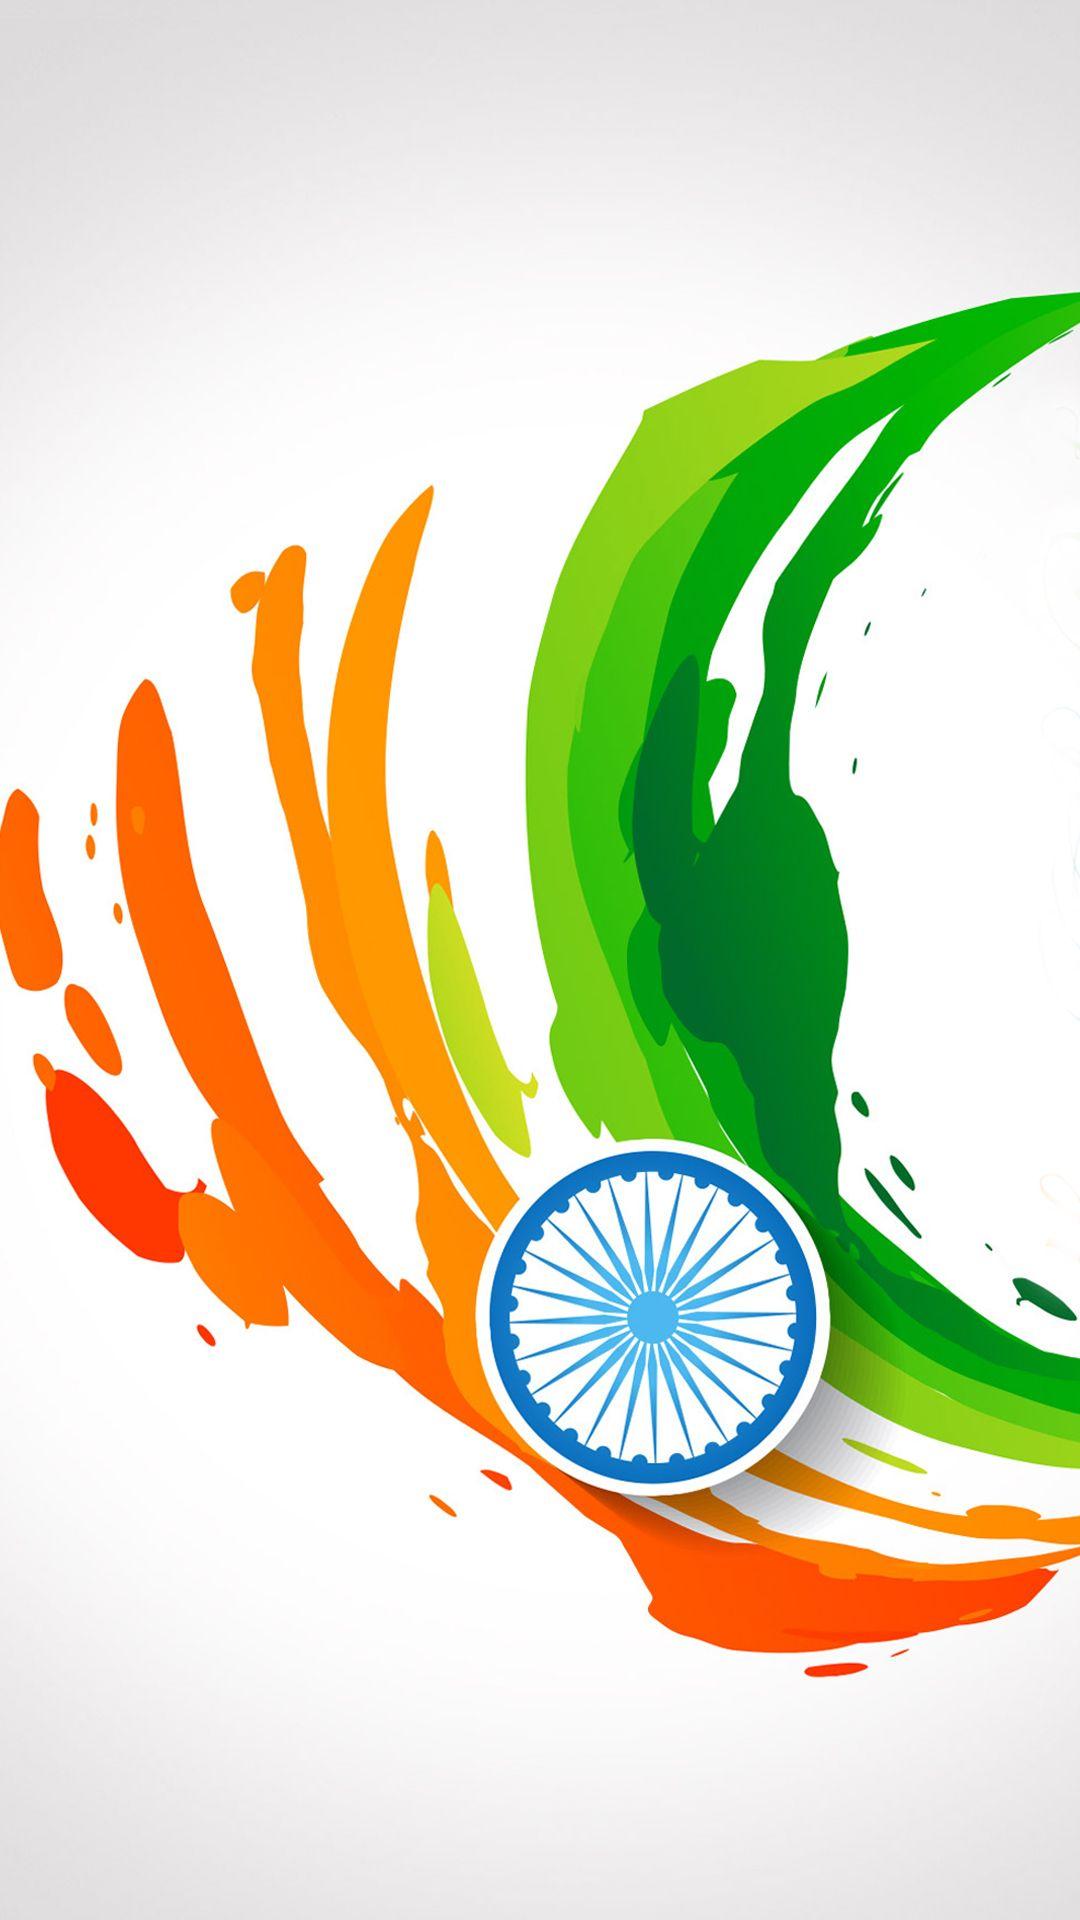 India Flag for Mobile Phone Wallpaper 14 of 17 Tricolour Wallpaper. Wallpaper Download. High Resolution Wallpaper. India flag, Indian flag wallpaper, Happy independence day image